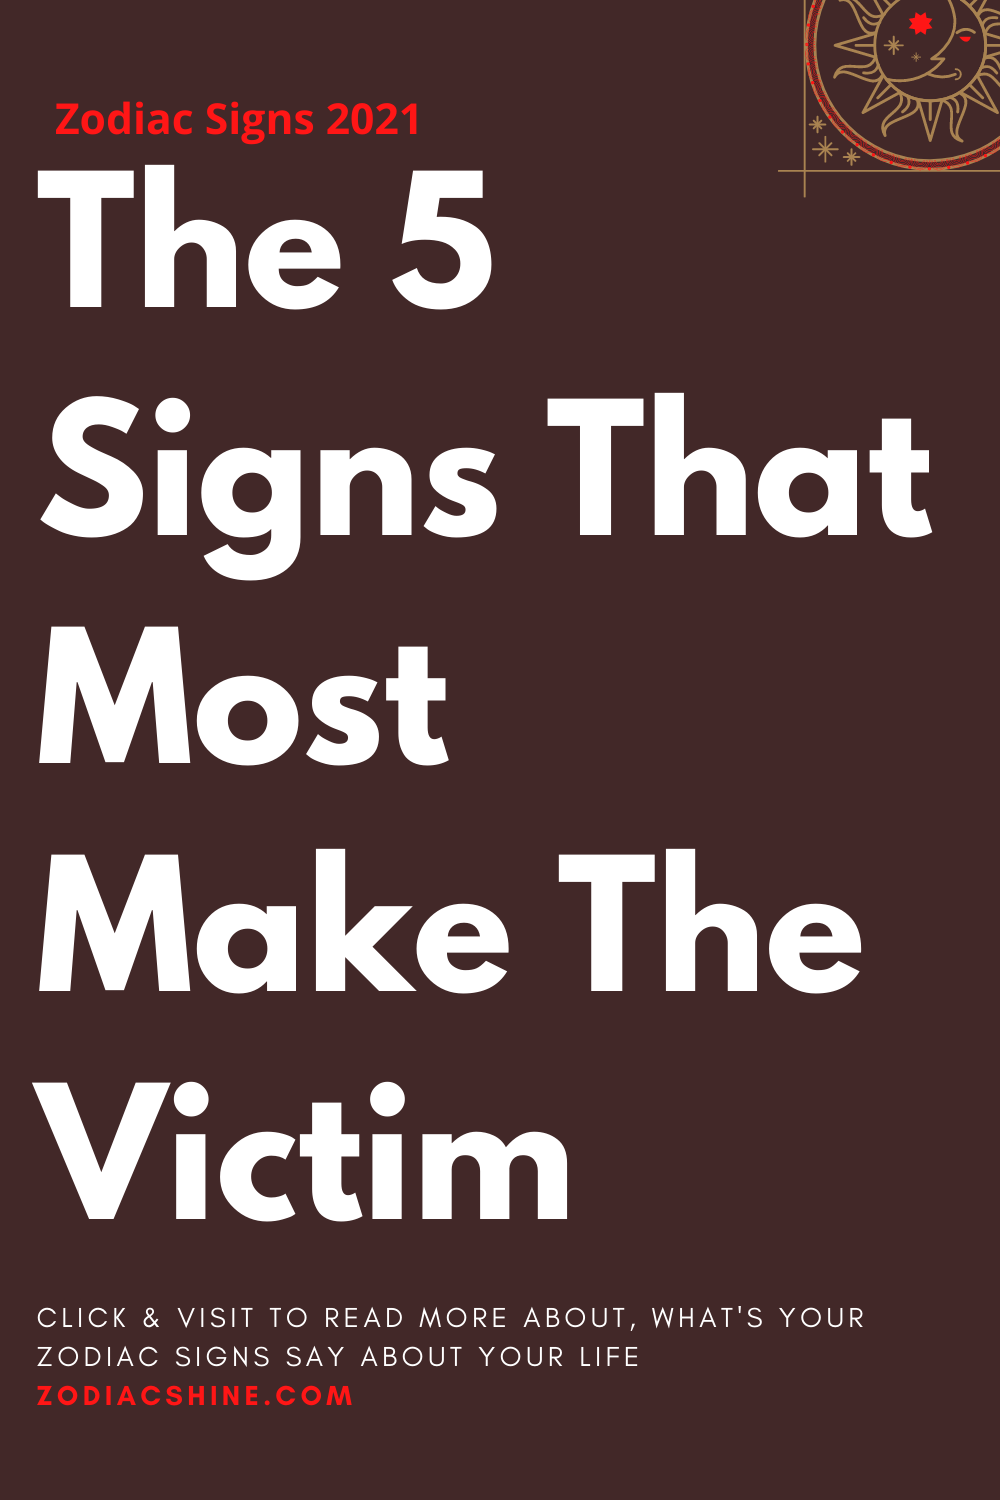 The 5 Signs That Most Make The Victim